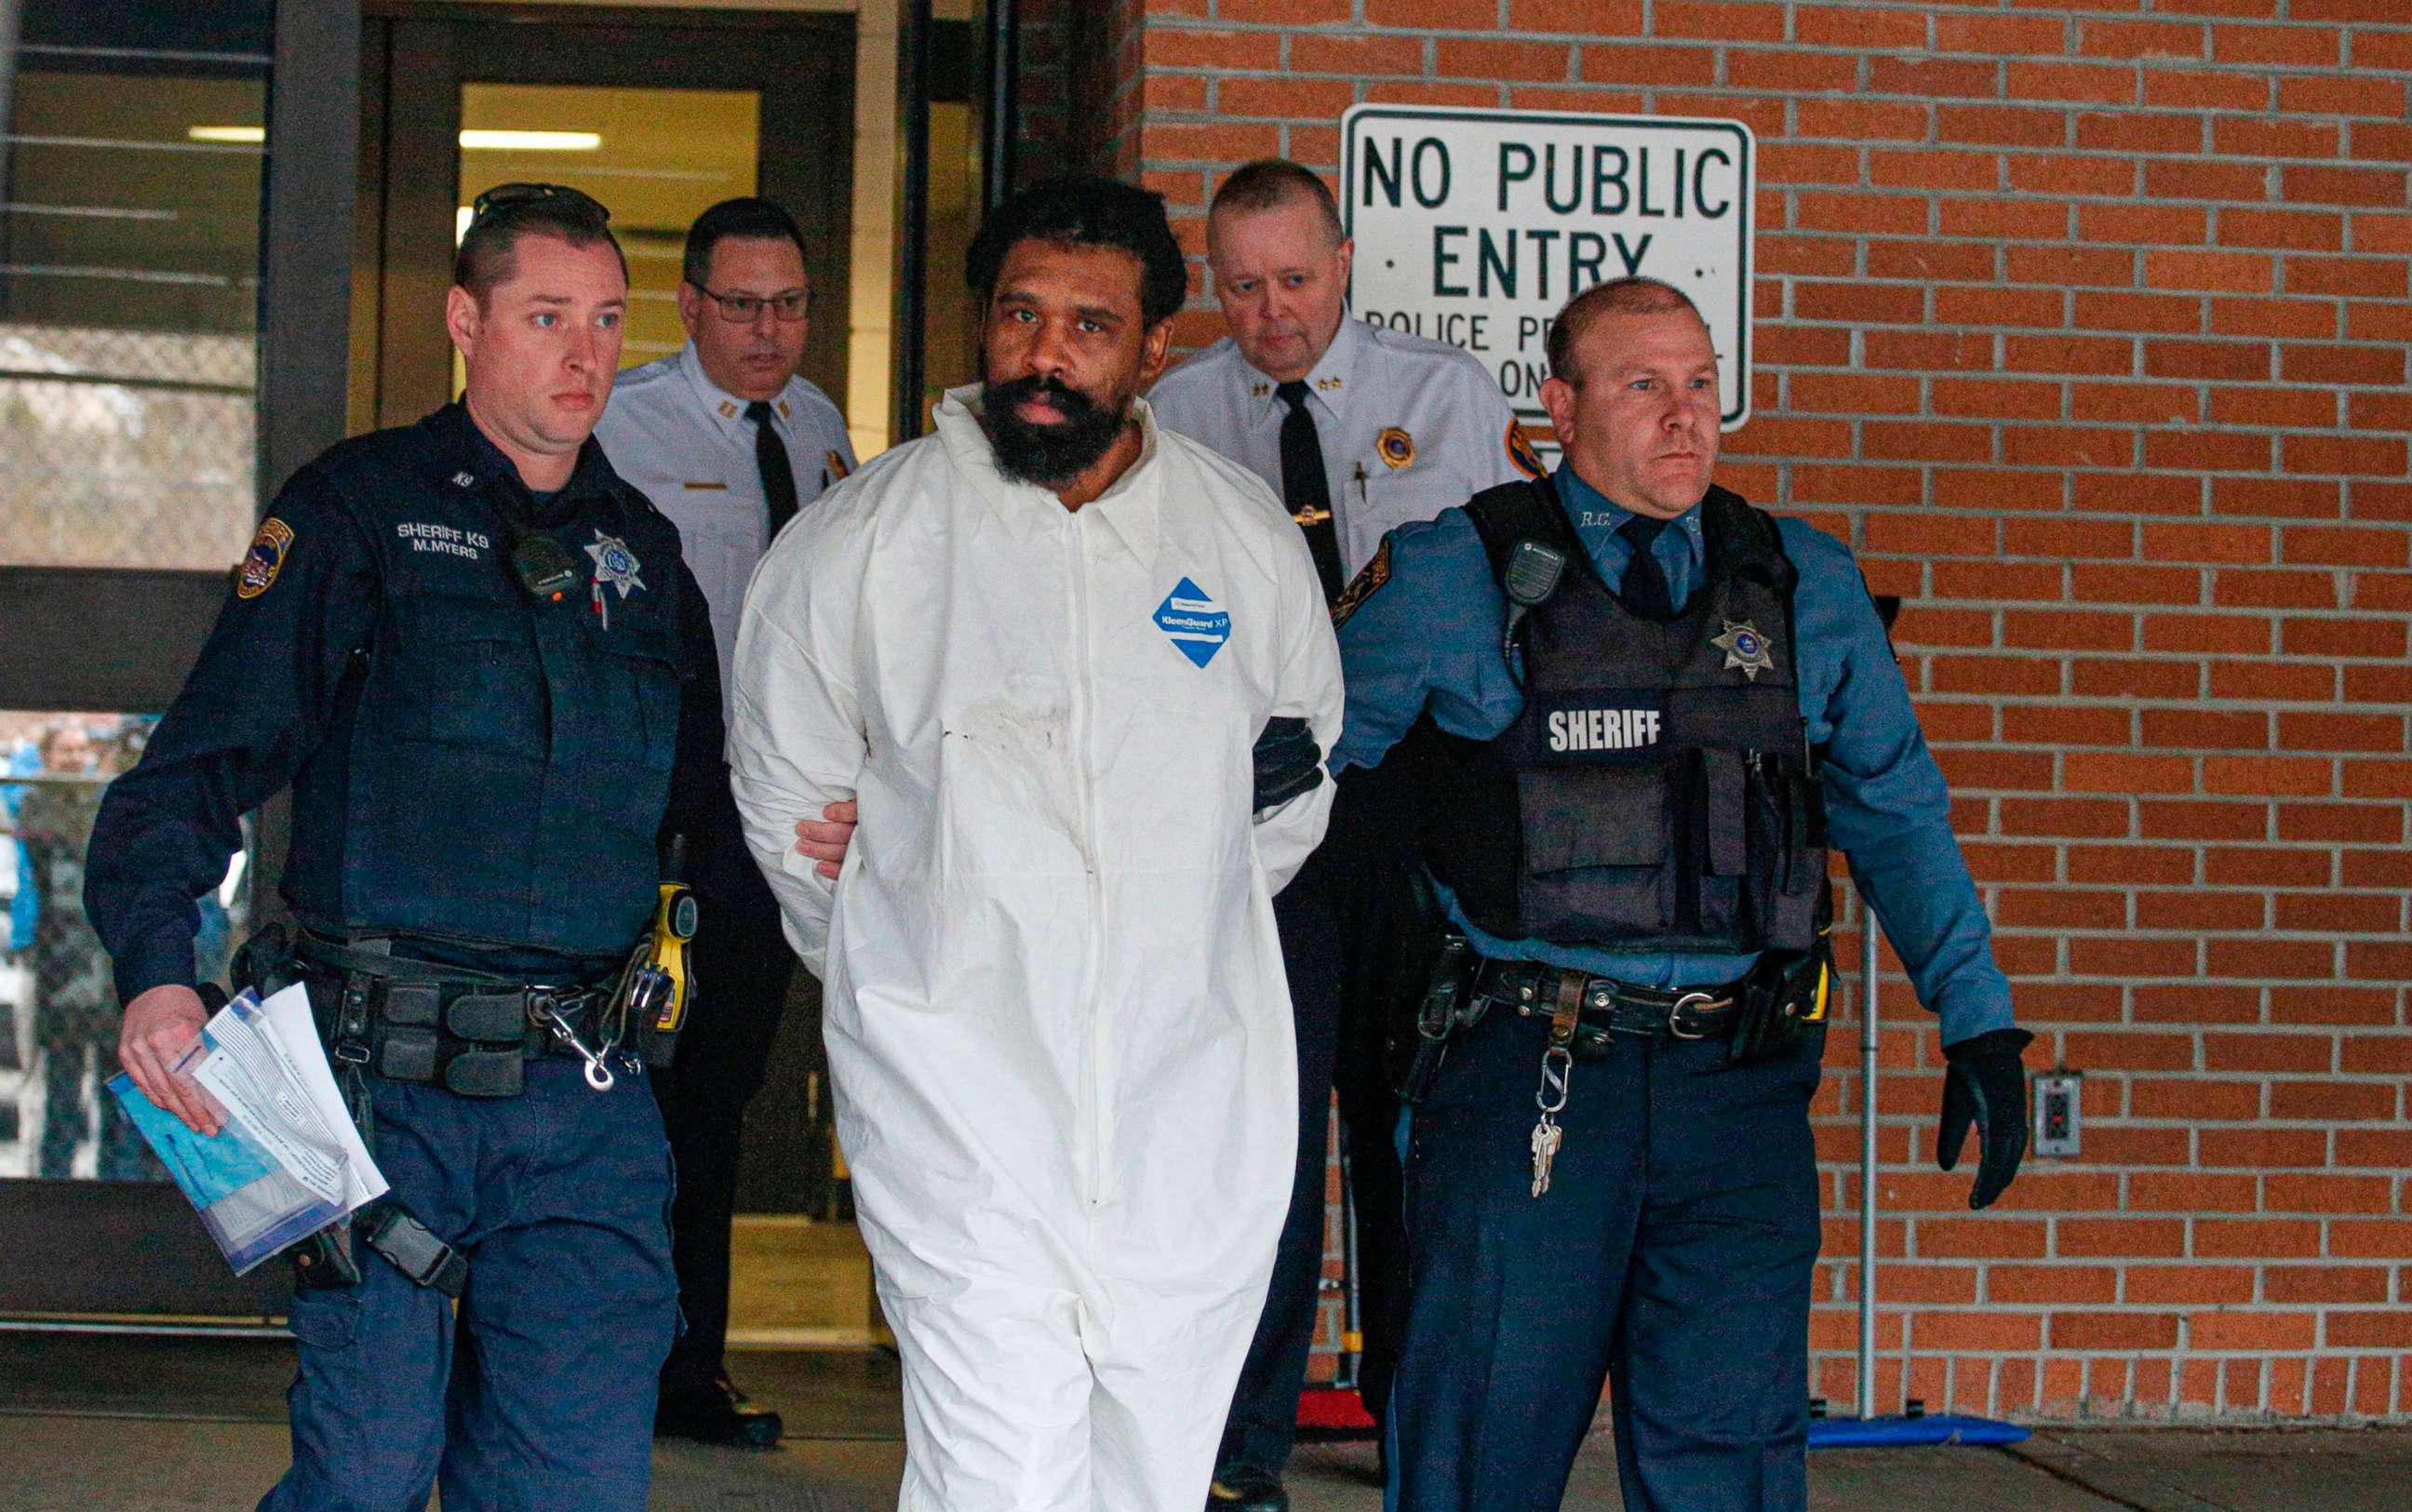 PHOTO: Thomas Grafton, the suspect in Hanukkah celebration stabbings in Monsey, leaves the Ramapo Town Hall in Airmont, New York after being arrested on Dec. 29, 2019.